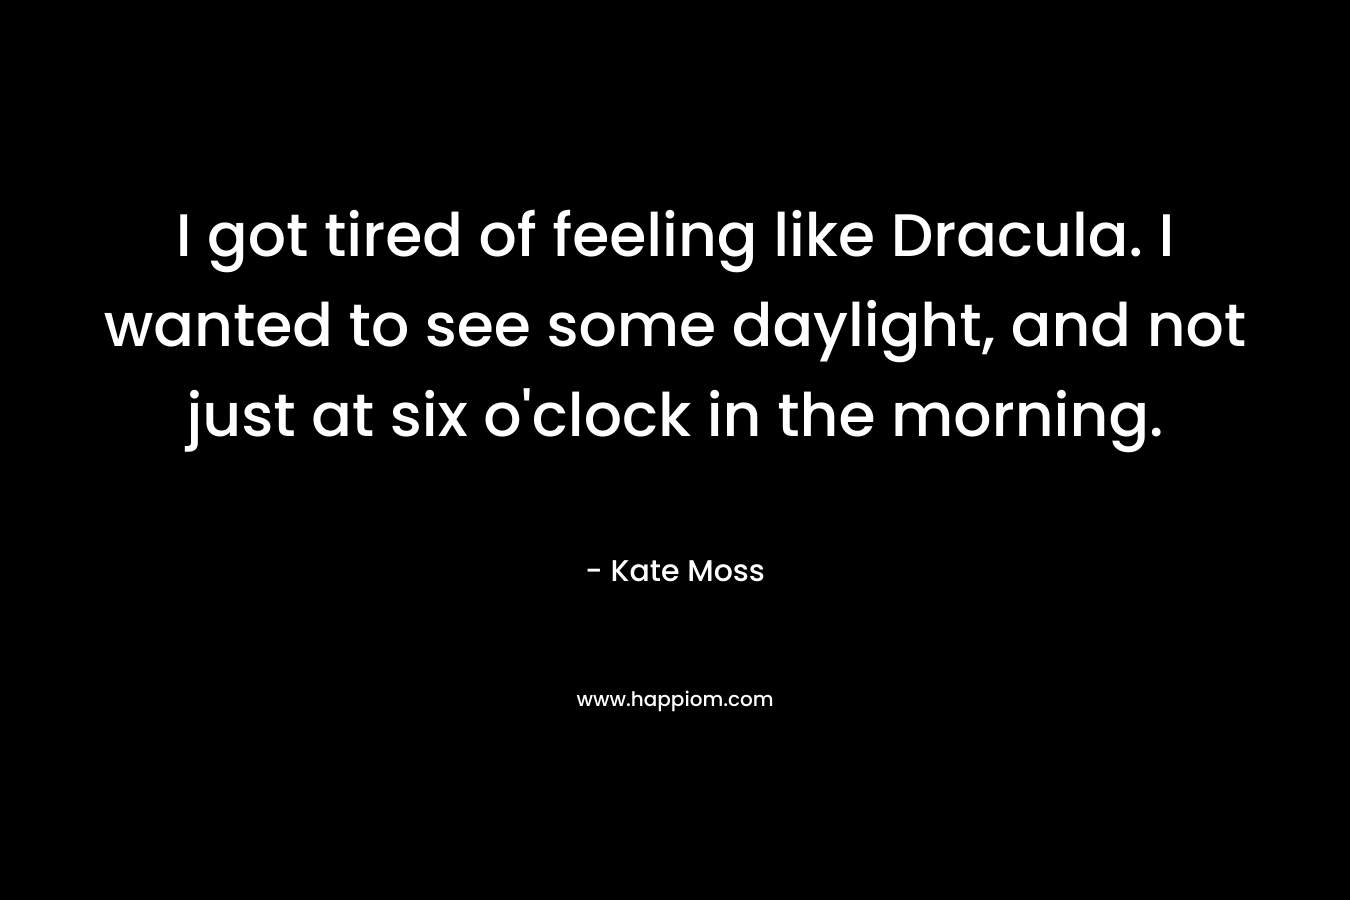 I got tired of feeling like Dracula. I wanted to see some daylight, and not just at six o'clock in the morning.